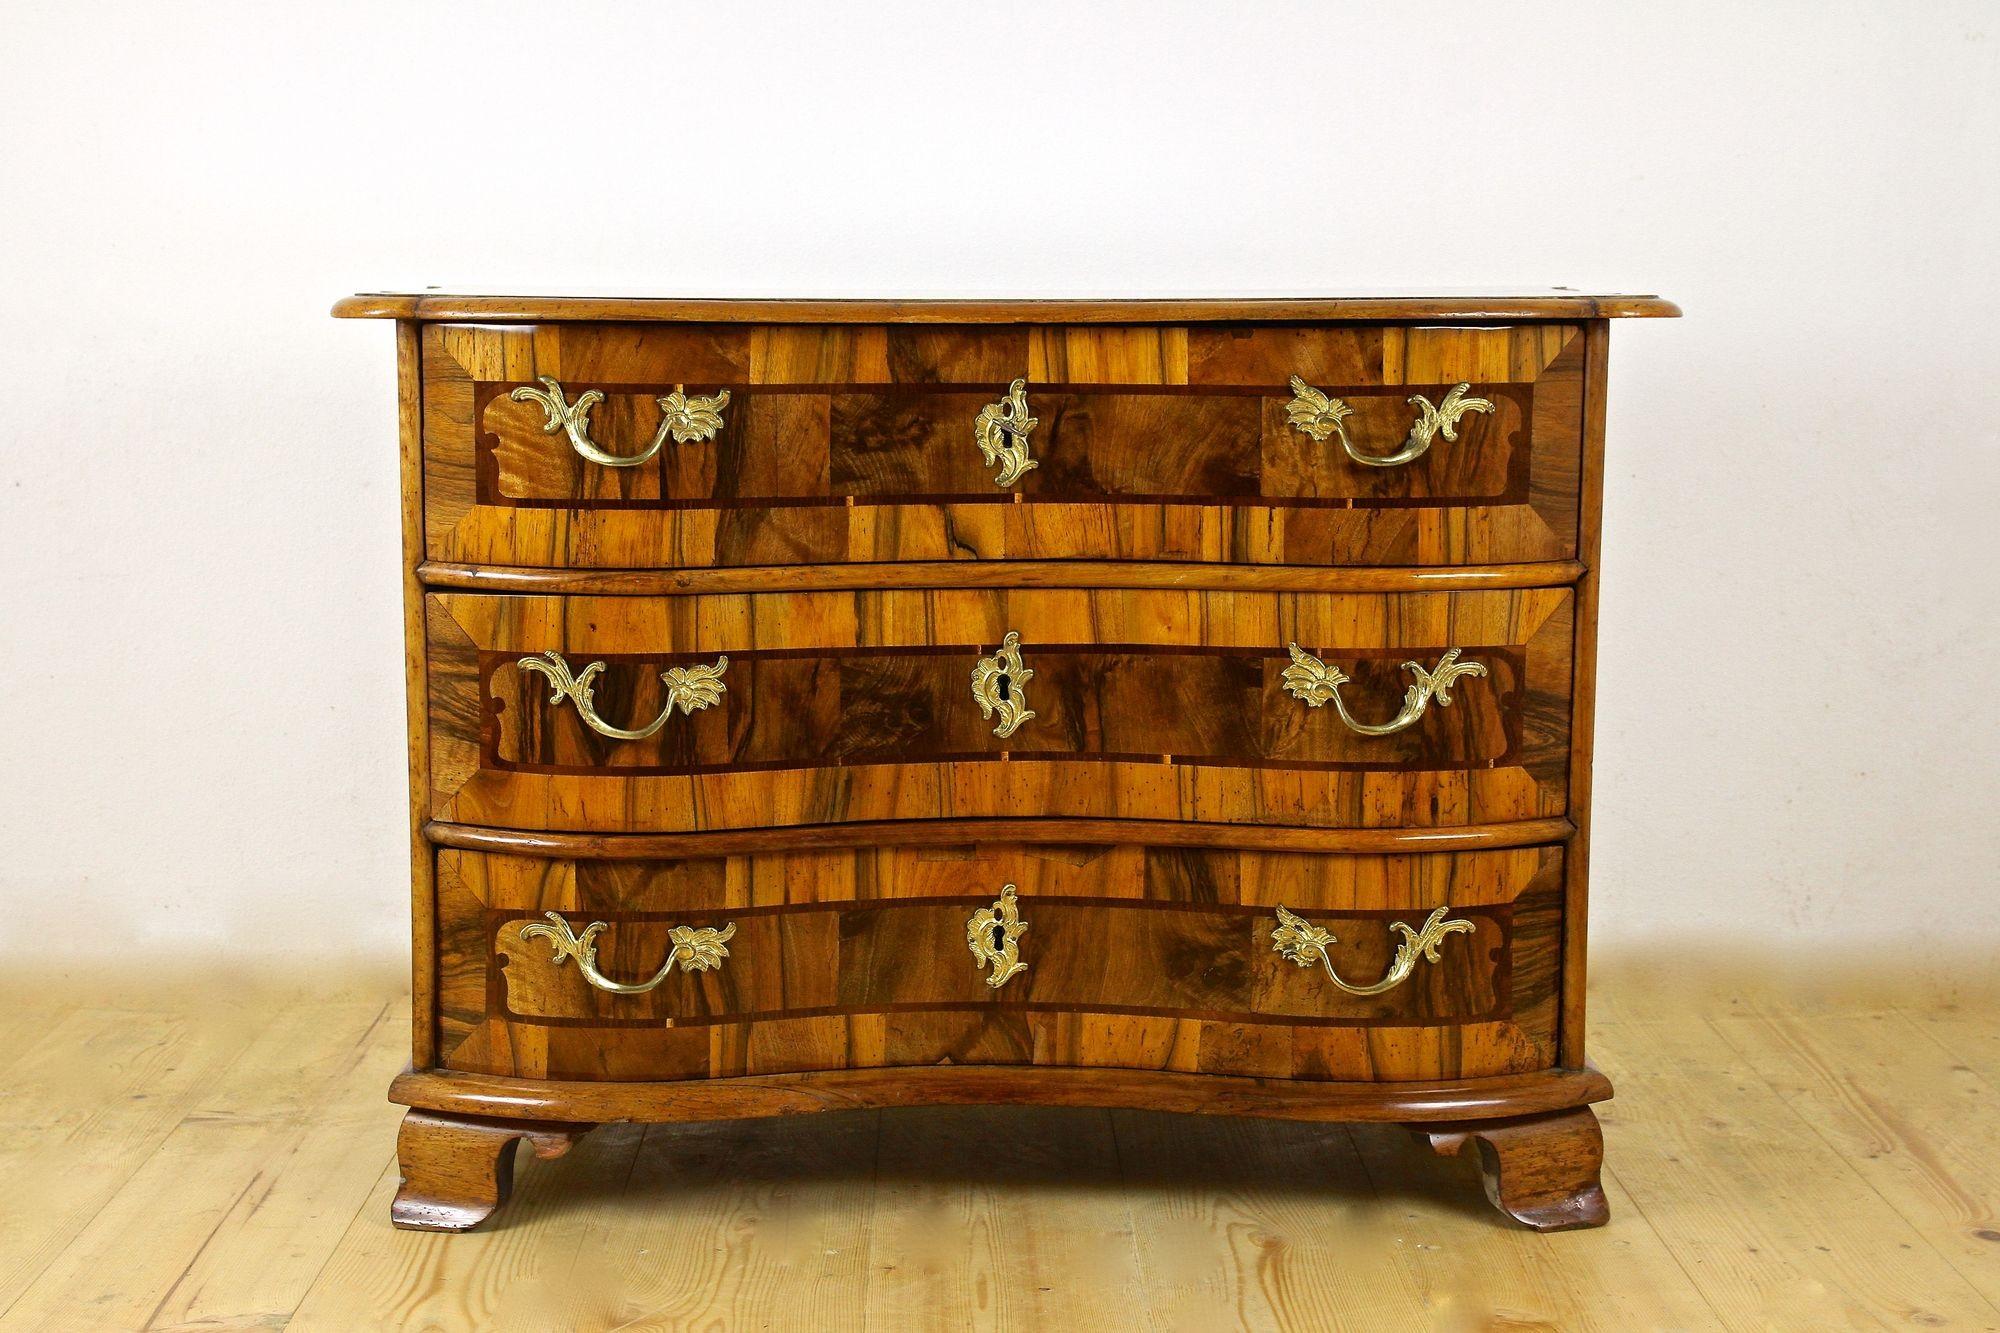 Extraordinary, rare baroque chest of drawers from the 18th century in South Germany. Elaborately made around 1760, this one of a kind Baroque commode impresses with amazing looking, beautifully nutwood surfaces and artfully crafted marquetry works.